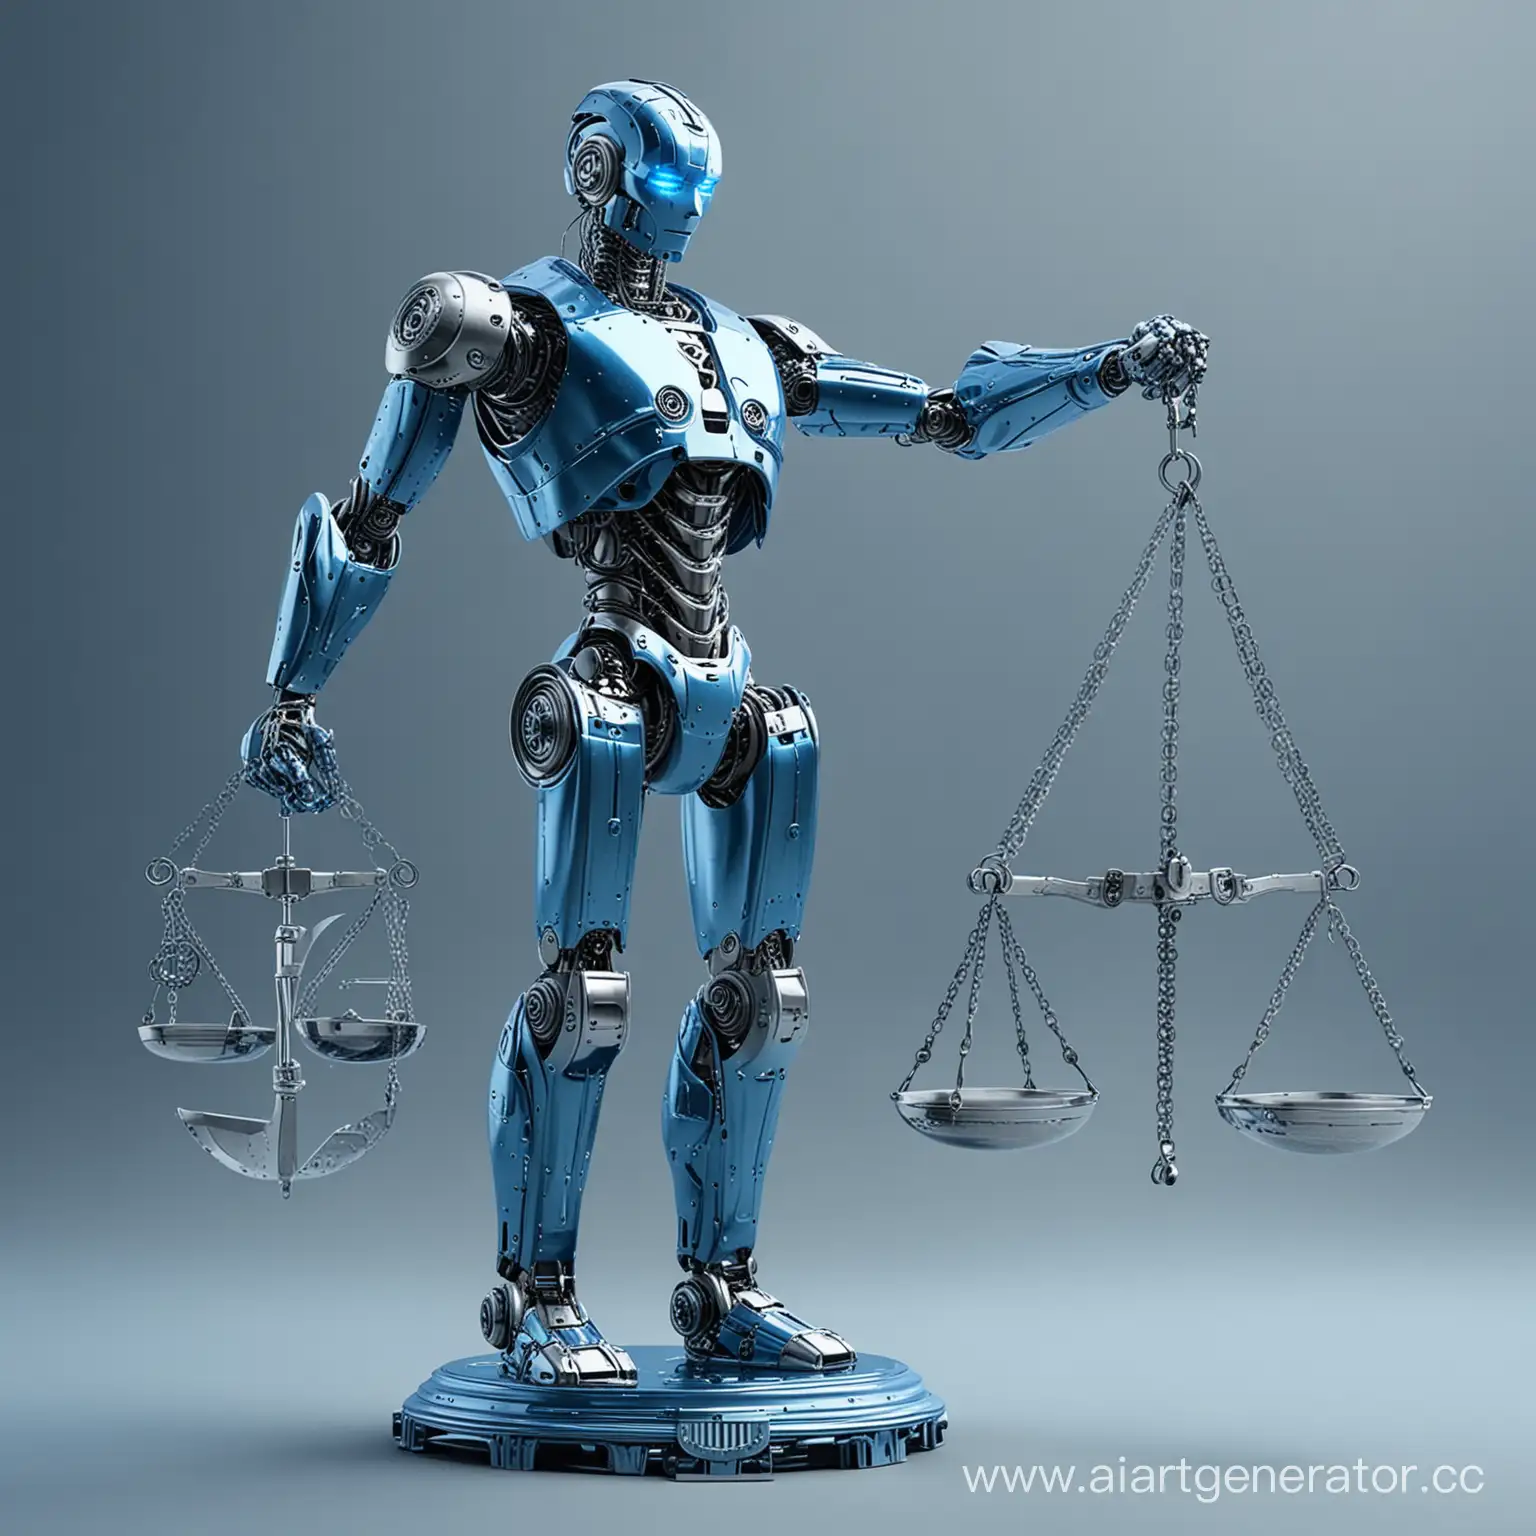 Blue-Toned-Metallic-Robot-with-Scales-of-Justice-Gazing-into-the-Distance